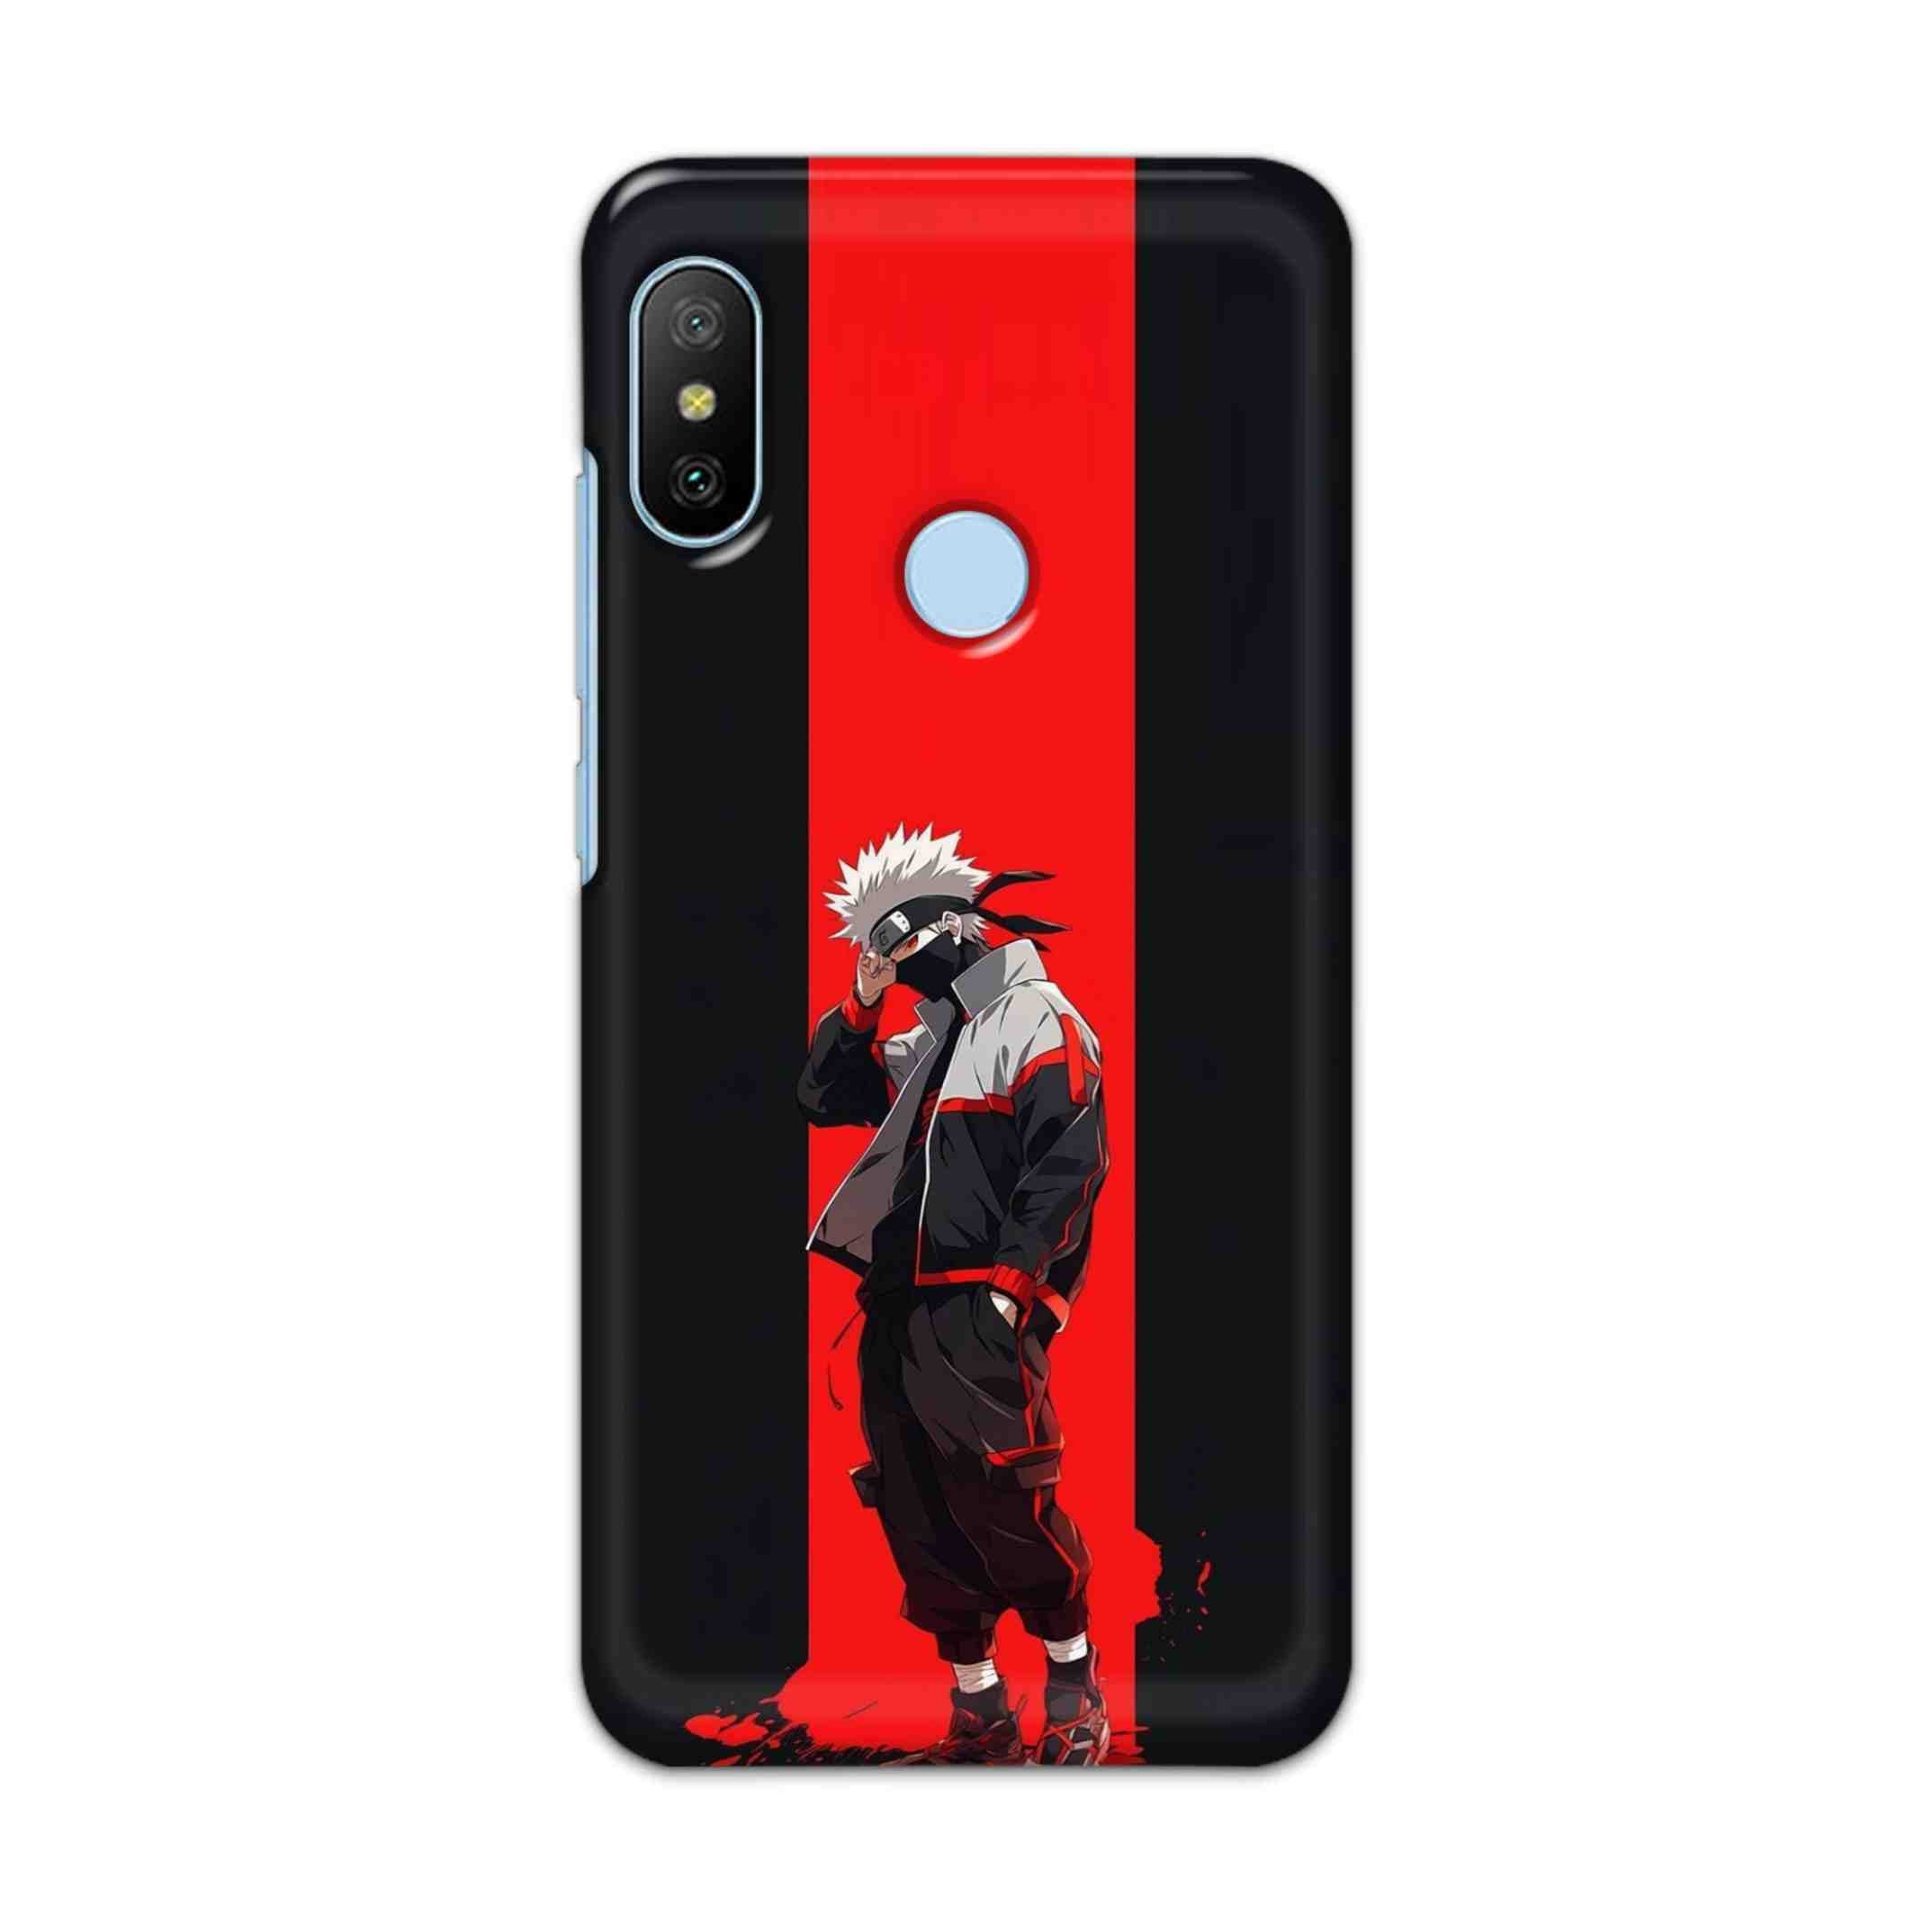 Buy Steins Hard Back Mobile Phone Case/Cover For Xiaomi Redmi 6 Pro Online